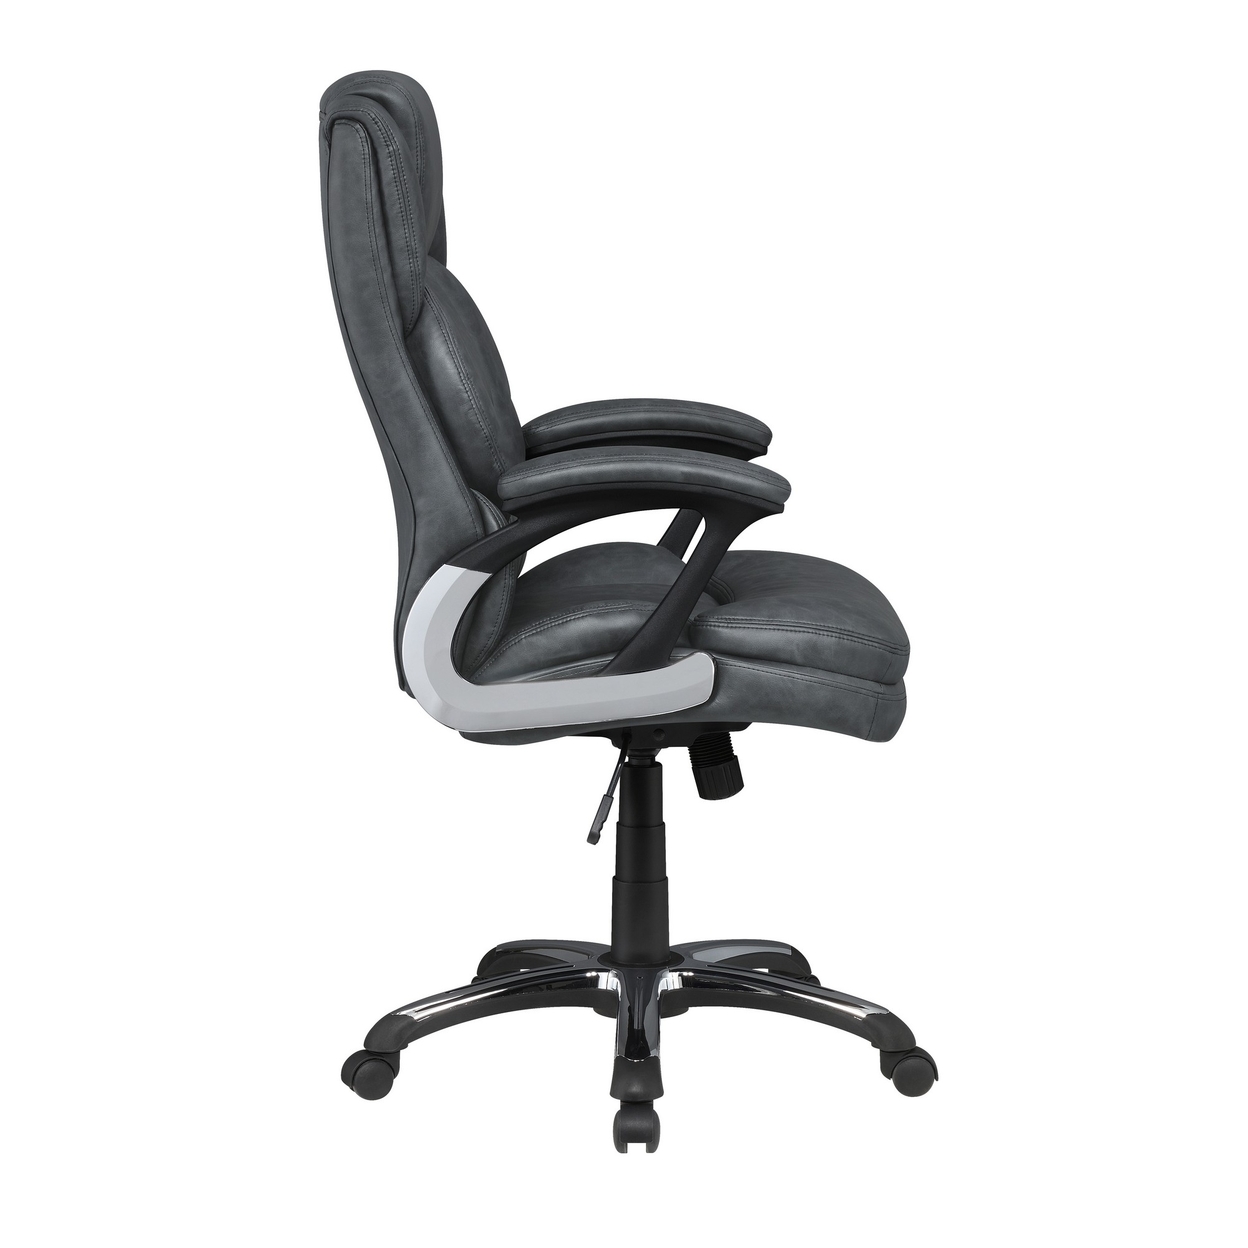 Leatherette Office Chair With Casters And Padded Arms, Gray- Saltoro Sherpi